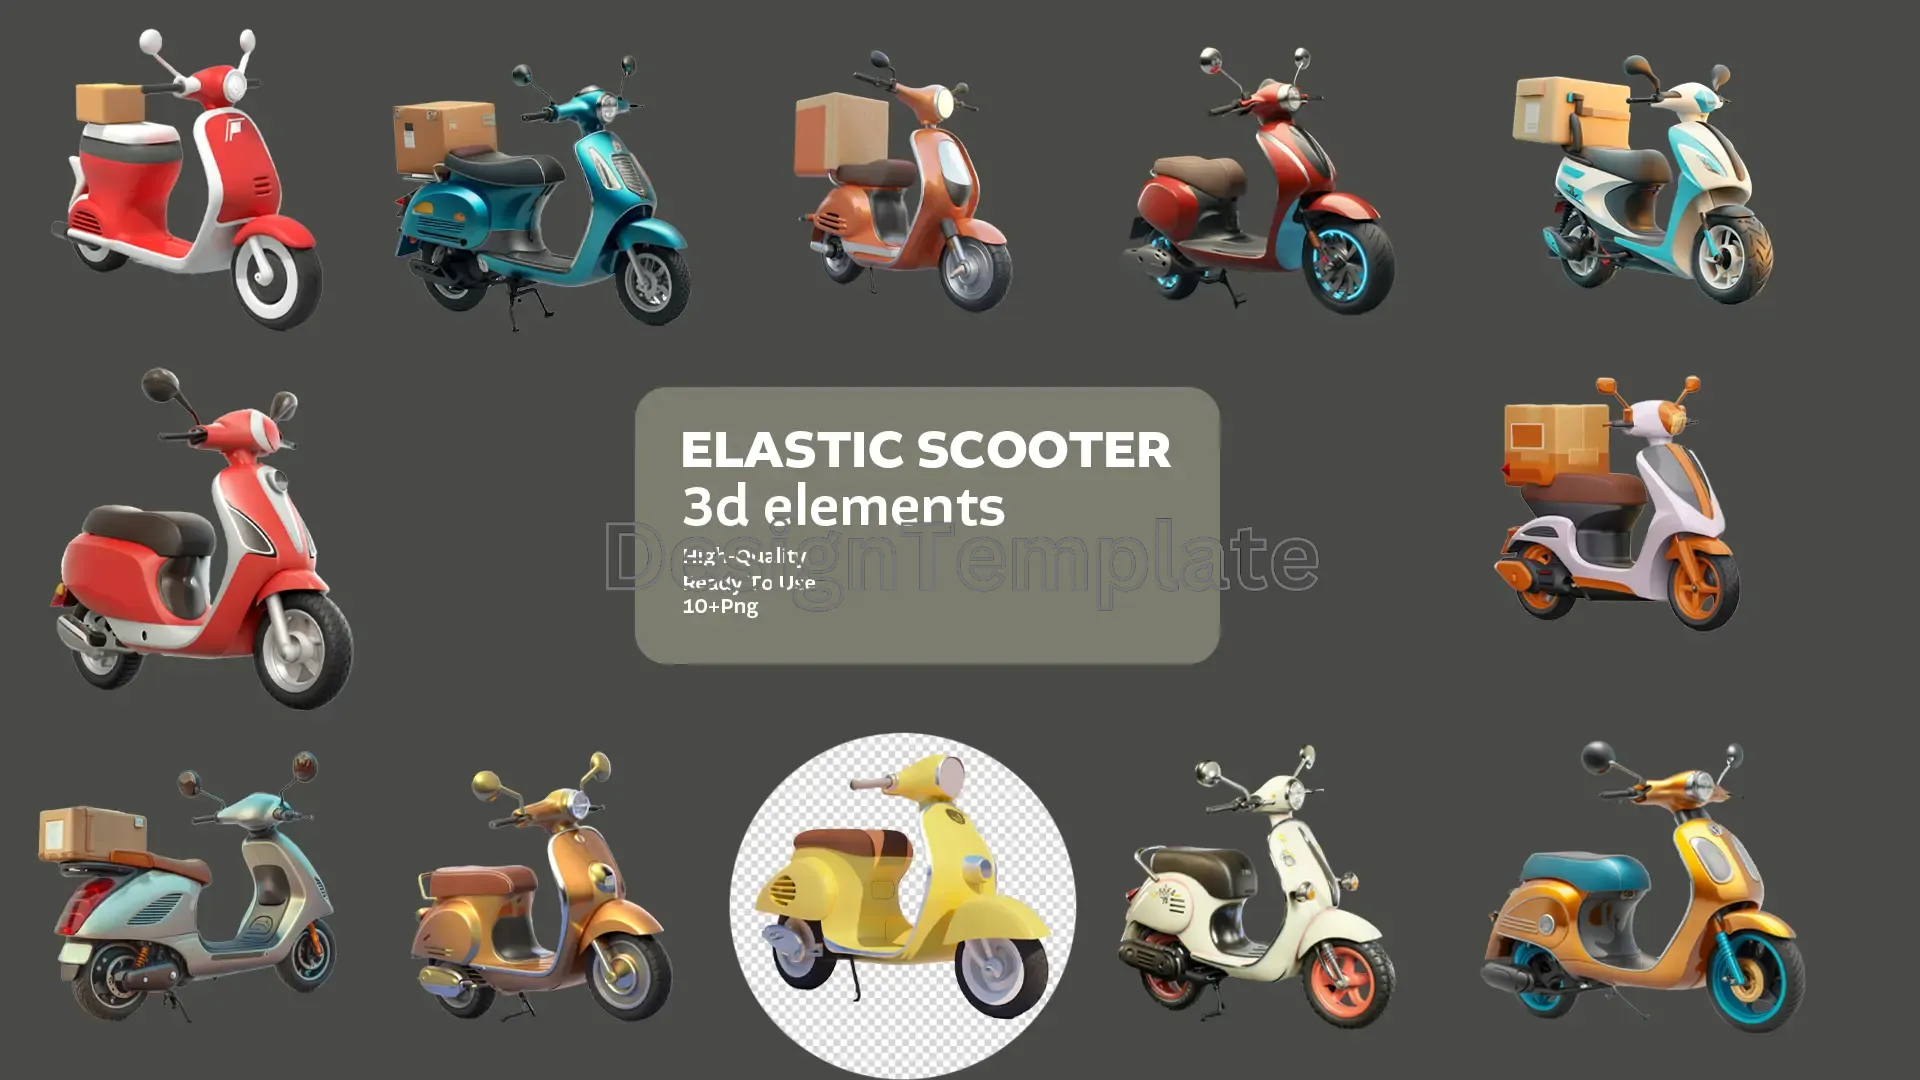 Urban Glide Elastic Scooter 3D Elements Pack